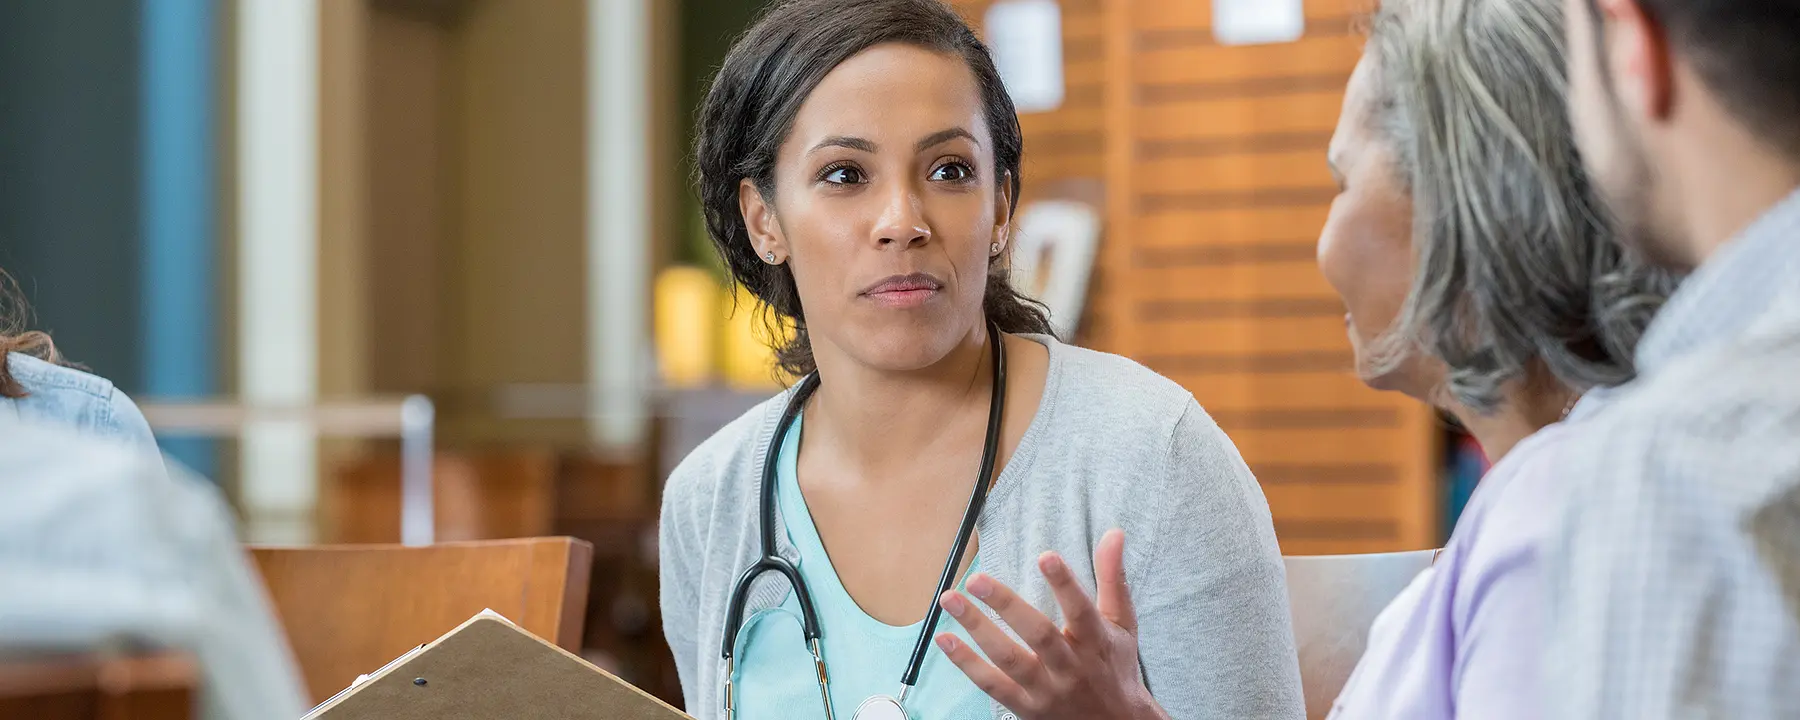 An African-American woman doctor talks with members of a health care team.